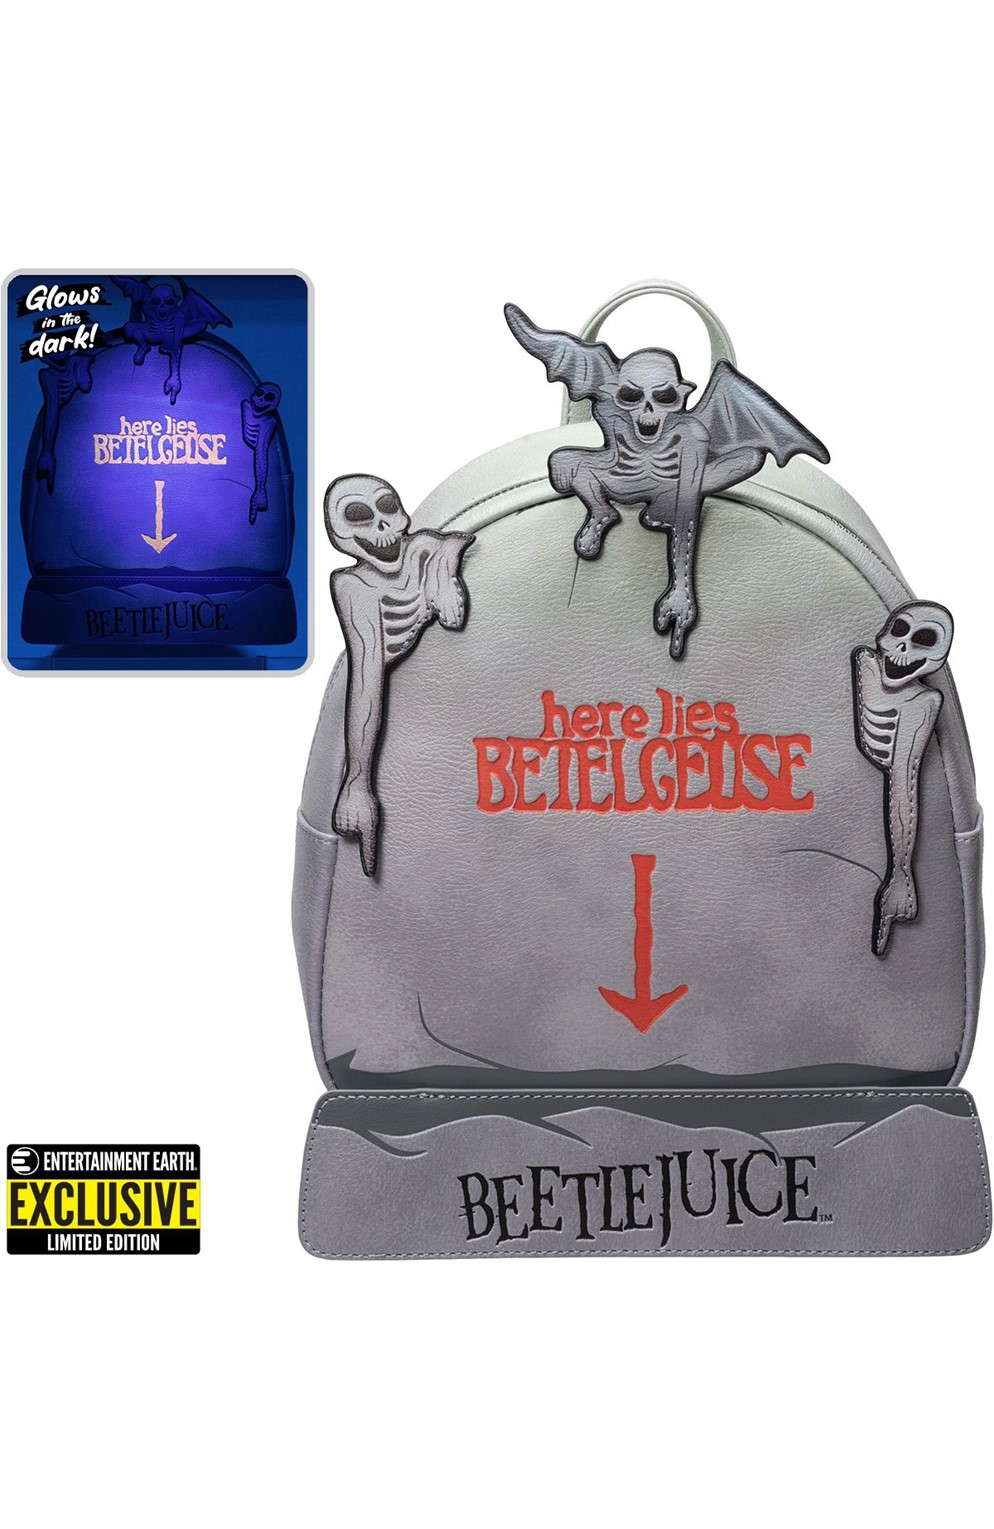 Beetlejuice Tombstone Glow-In-The-Dark Mini-Backpack - Entertainment Earth Exclusive